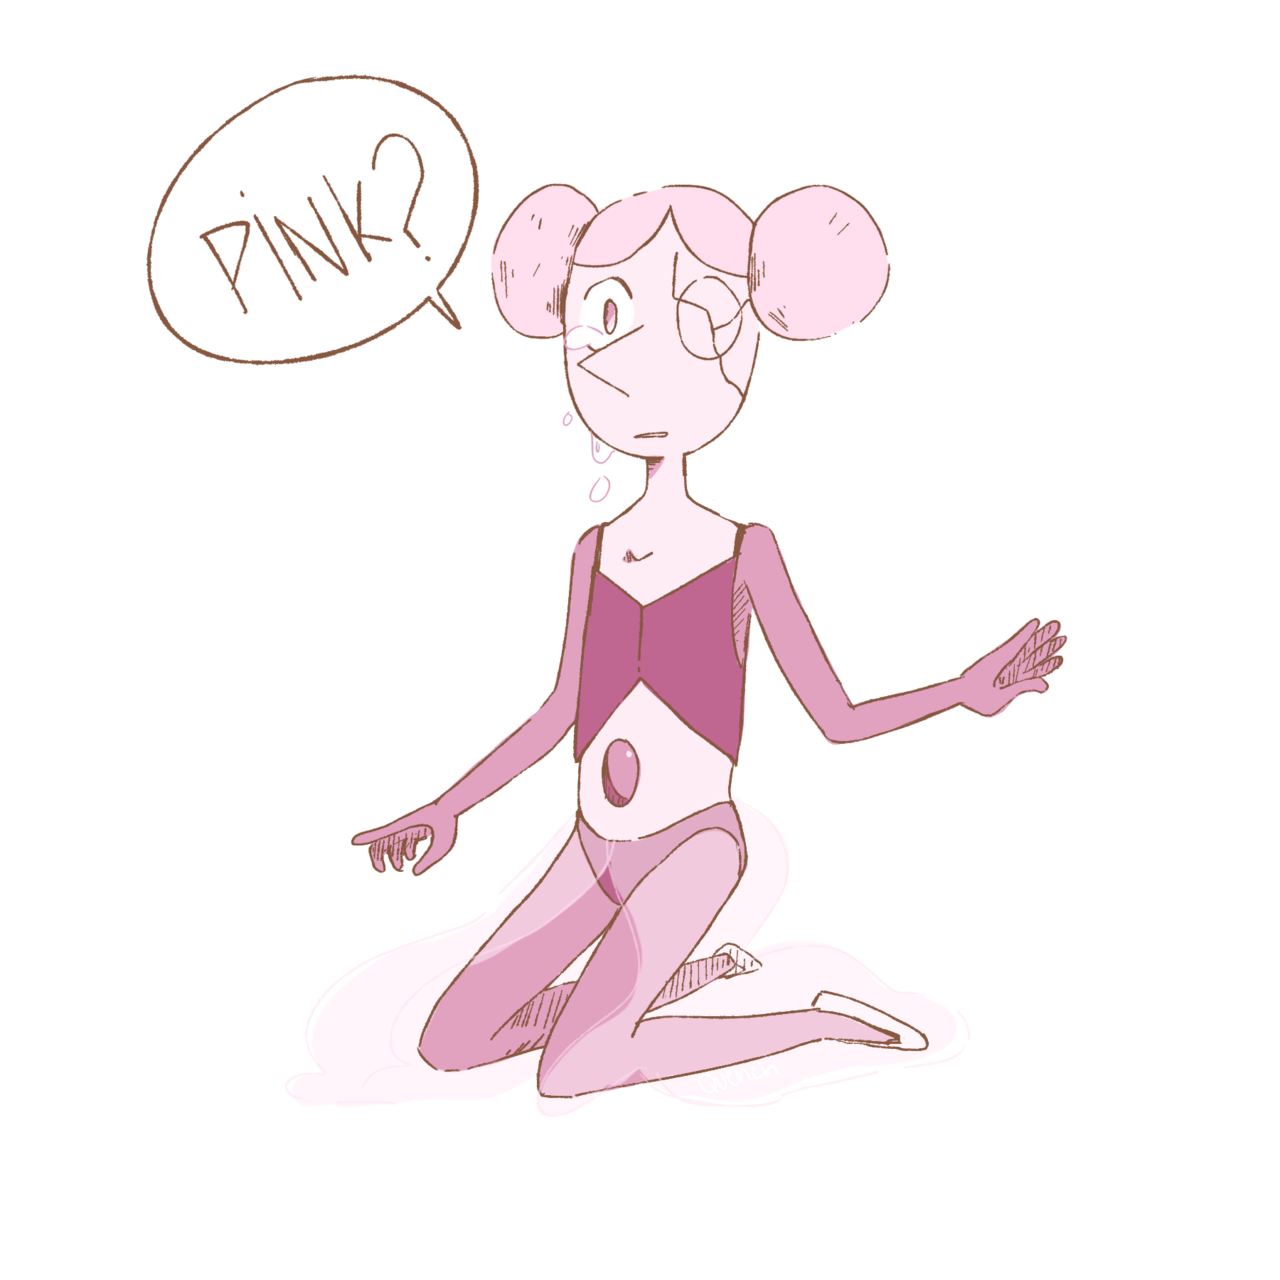 Oh pearl, what did she do to you? 🌸